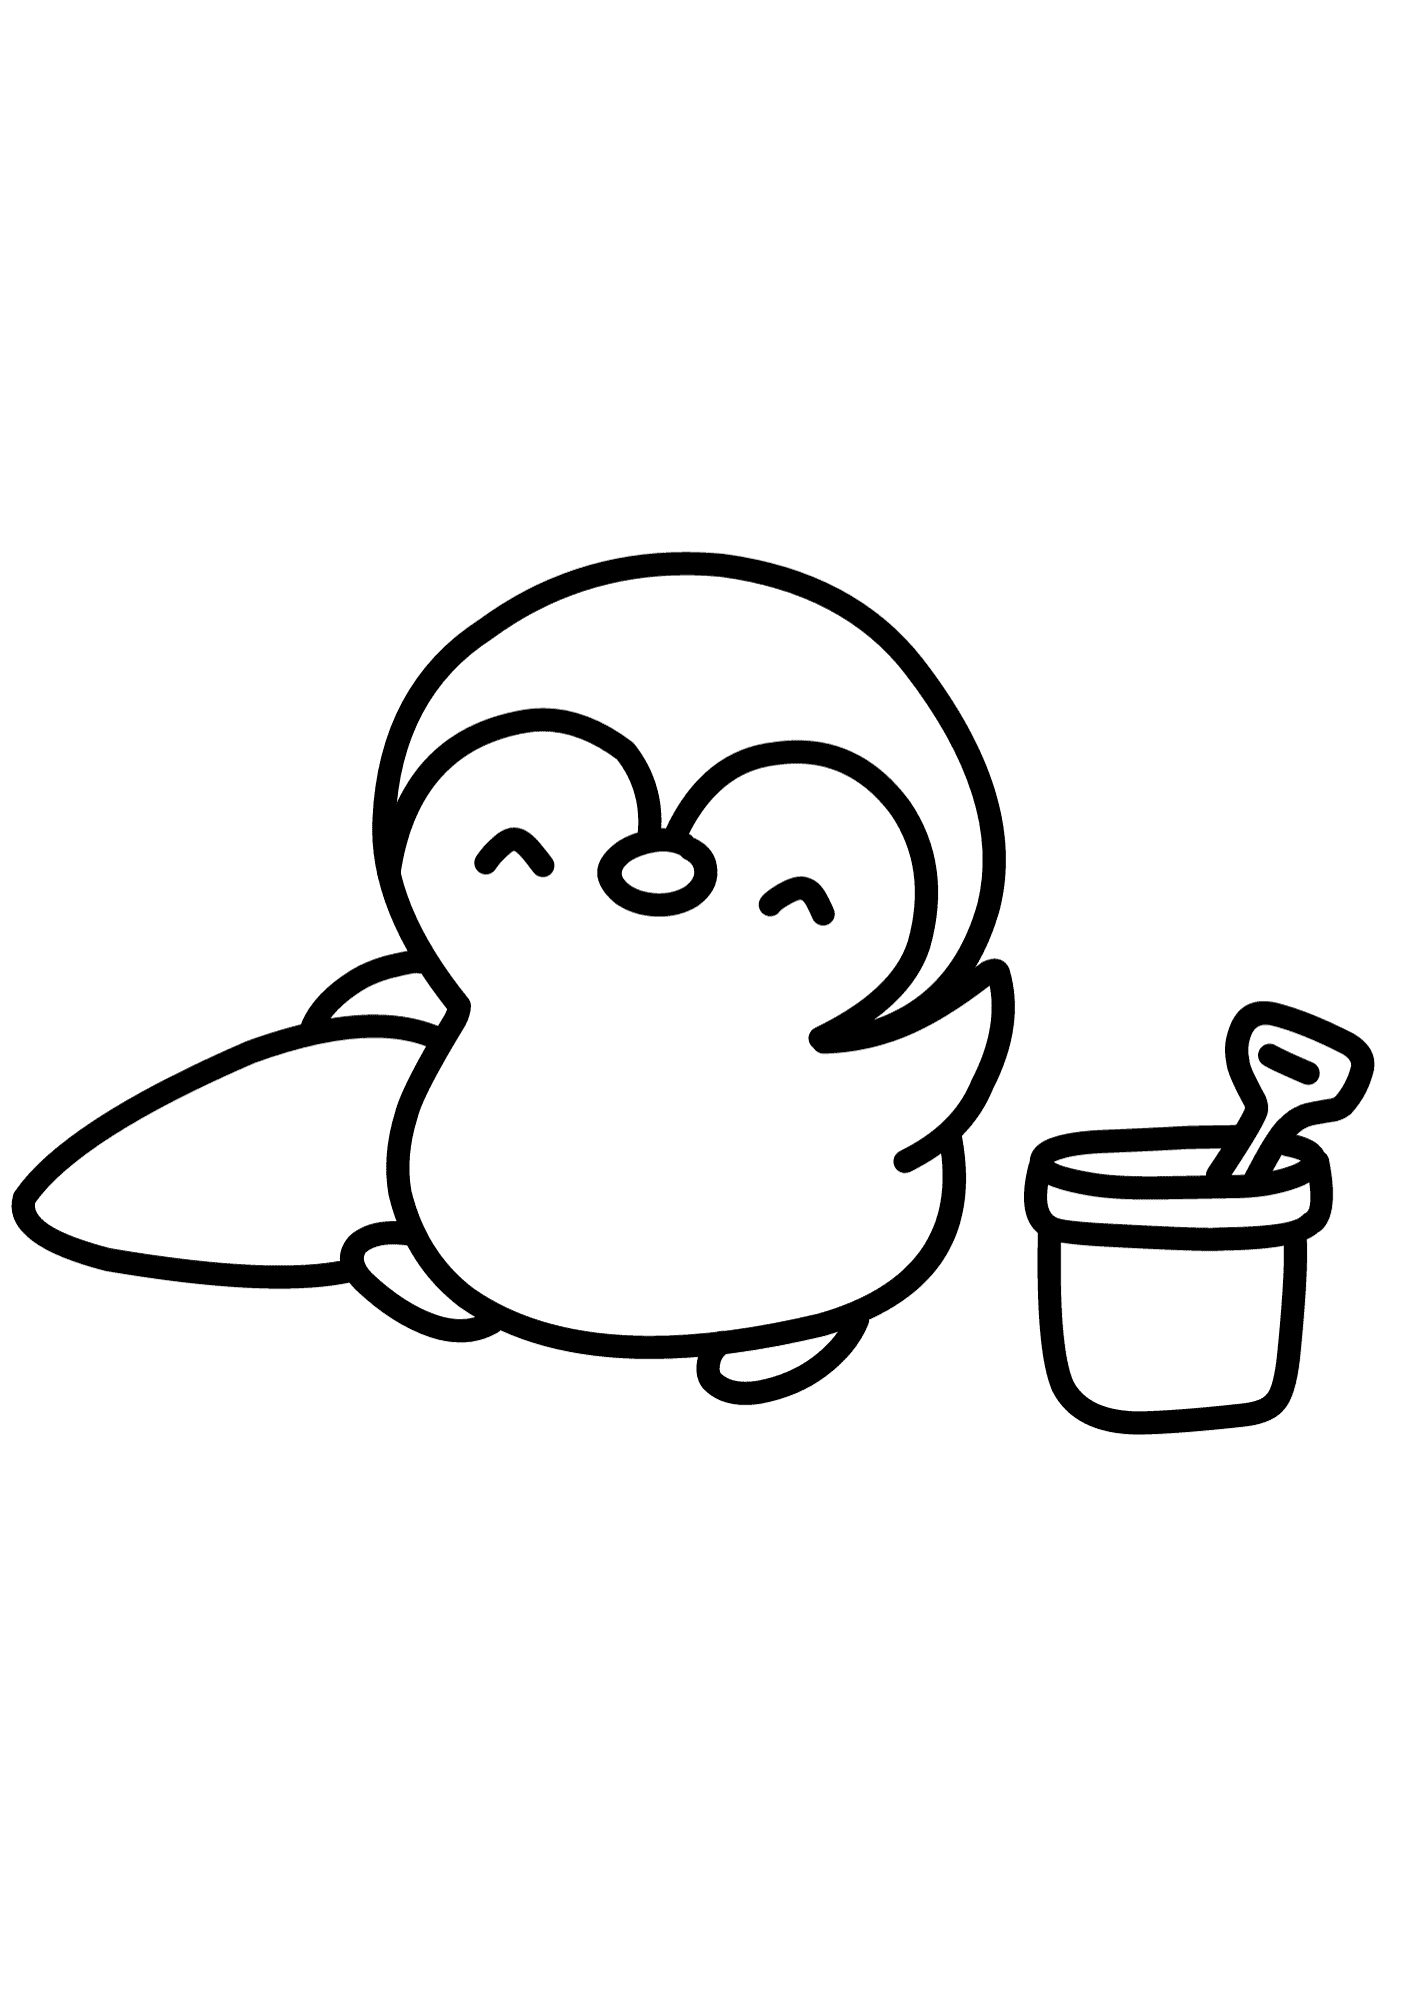 Penguin Picture Coloring Page